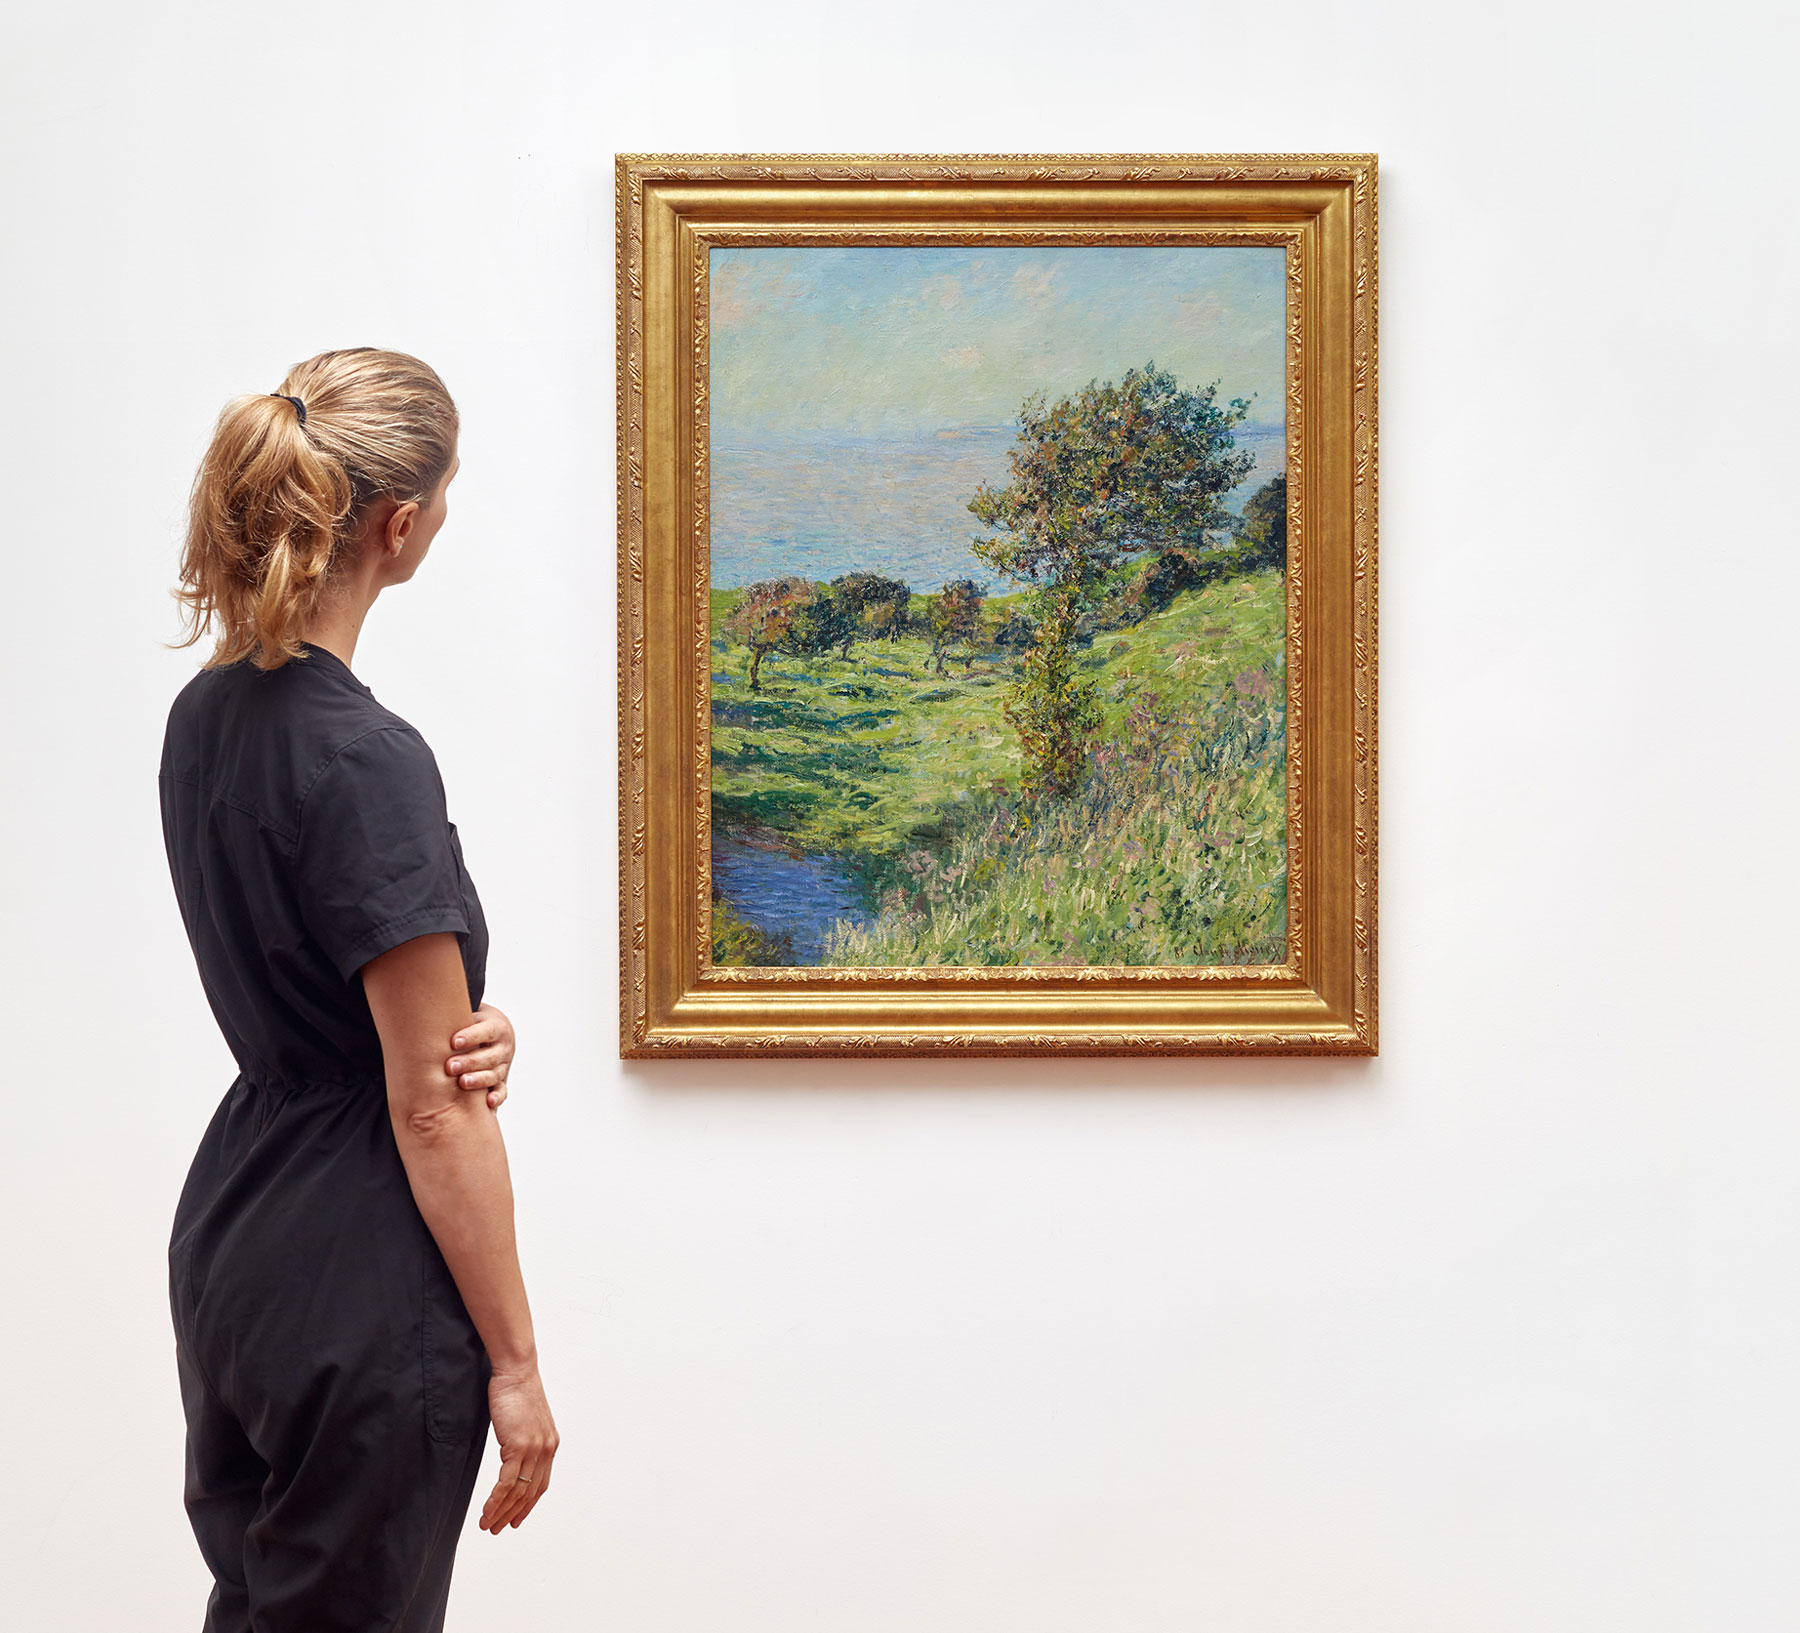 An impressionistic landscape painting by Monet in a white wall with a blonde viewer looking at it.